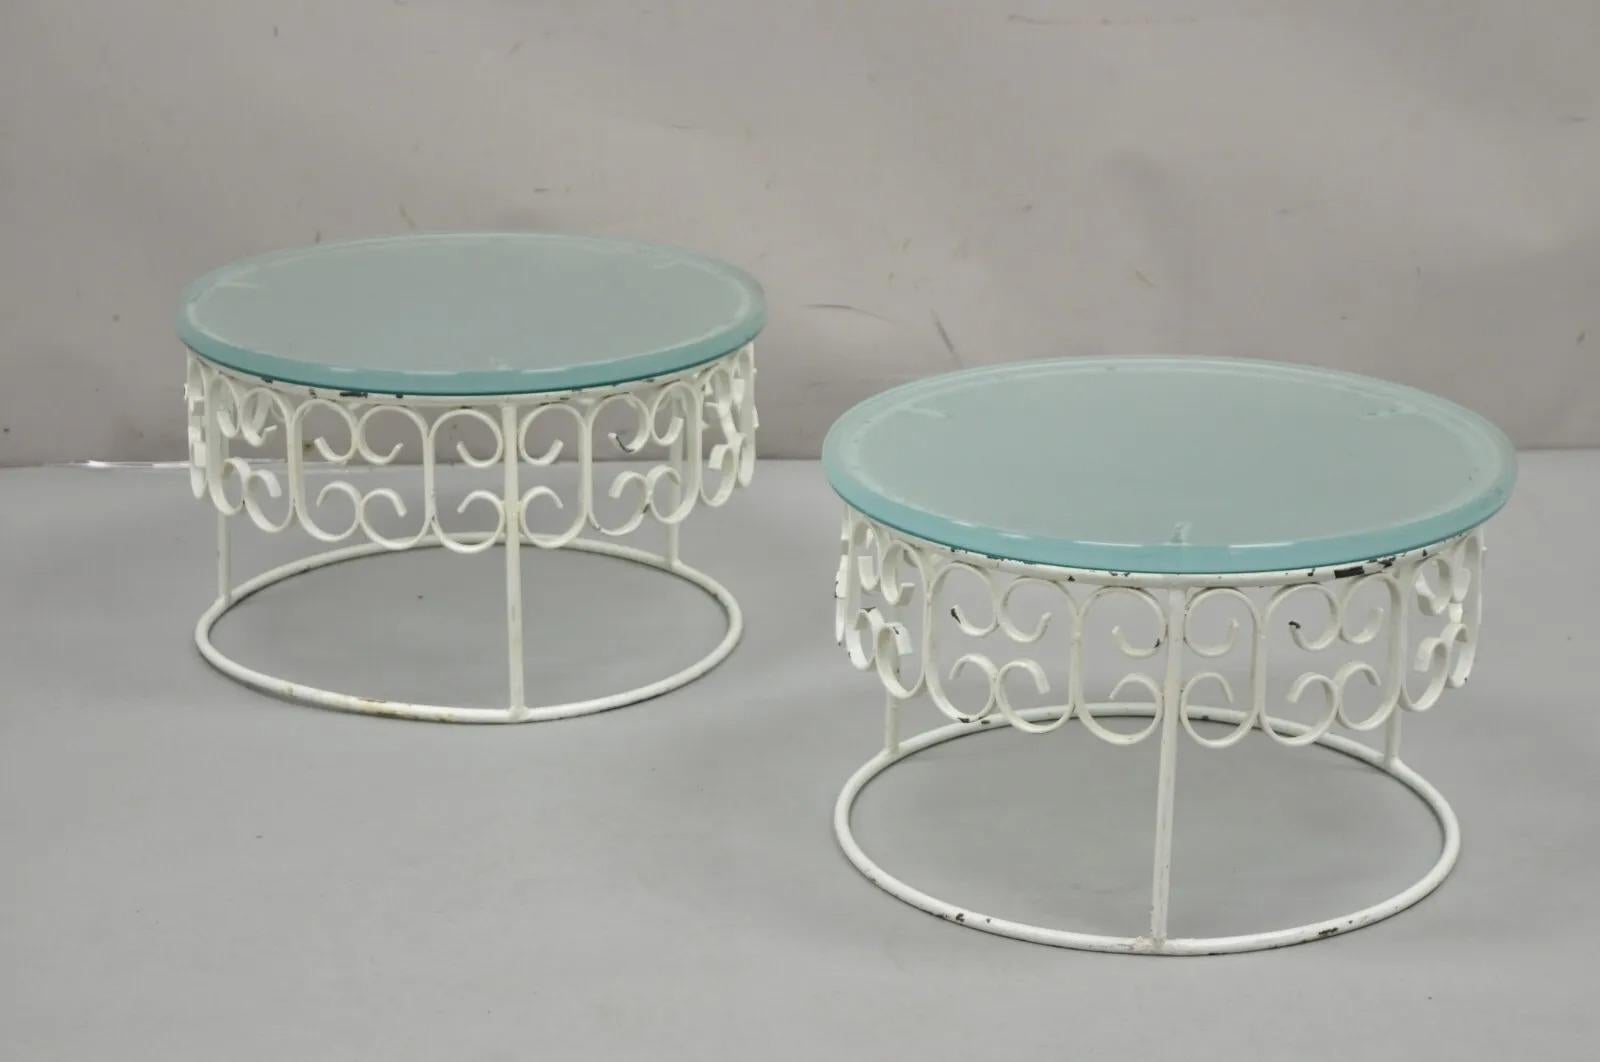 Vintage Arthur Umanoff Wrought Iron Scroll Low Round Glass Top Side Tables - a Pair. Item features thick round frosted glass tops, wrought iron round bases, nice unique low form. Circa 1960s. Measurements: 11